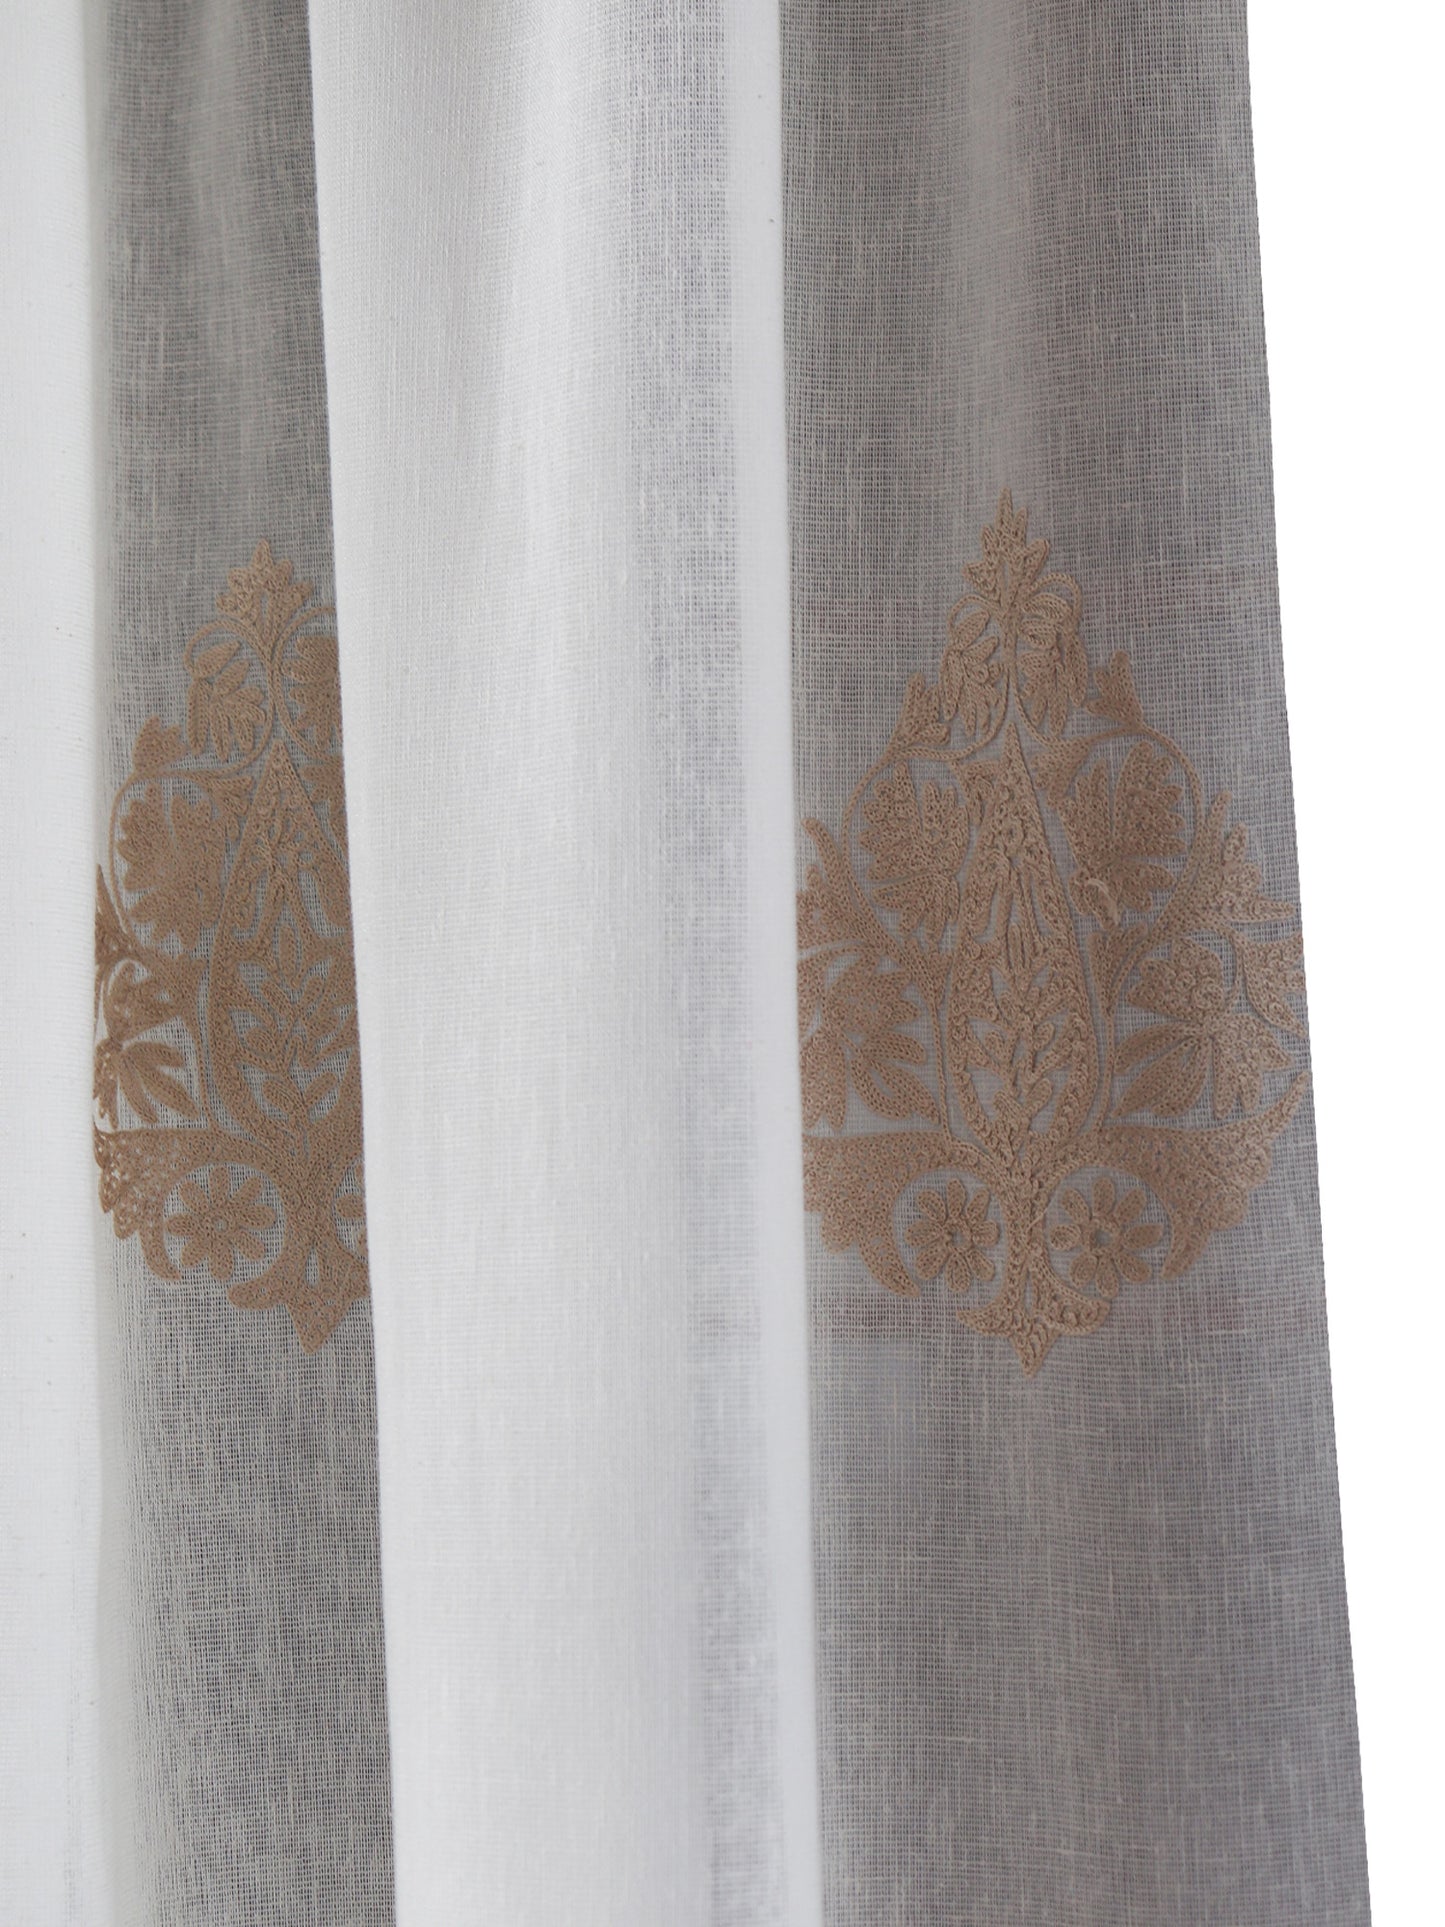 Door Semi Transparent Sheer Polyester with Golden Embroidered Motif White - 54" x 84"